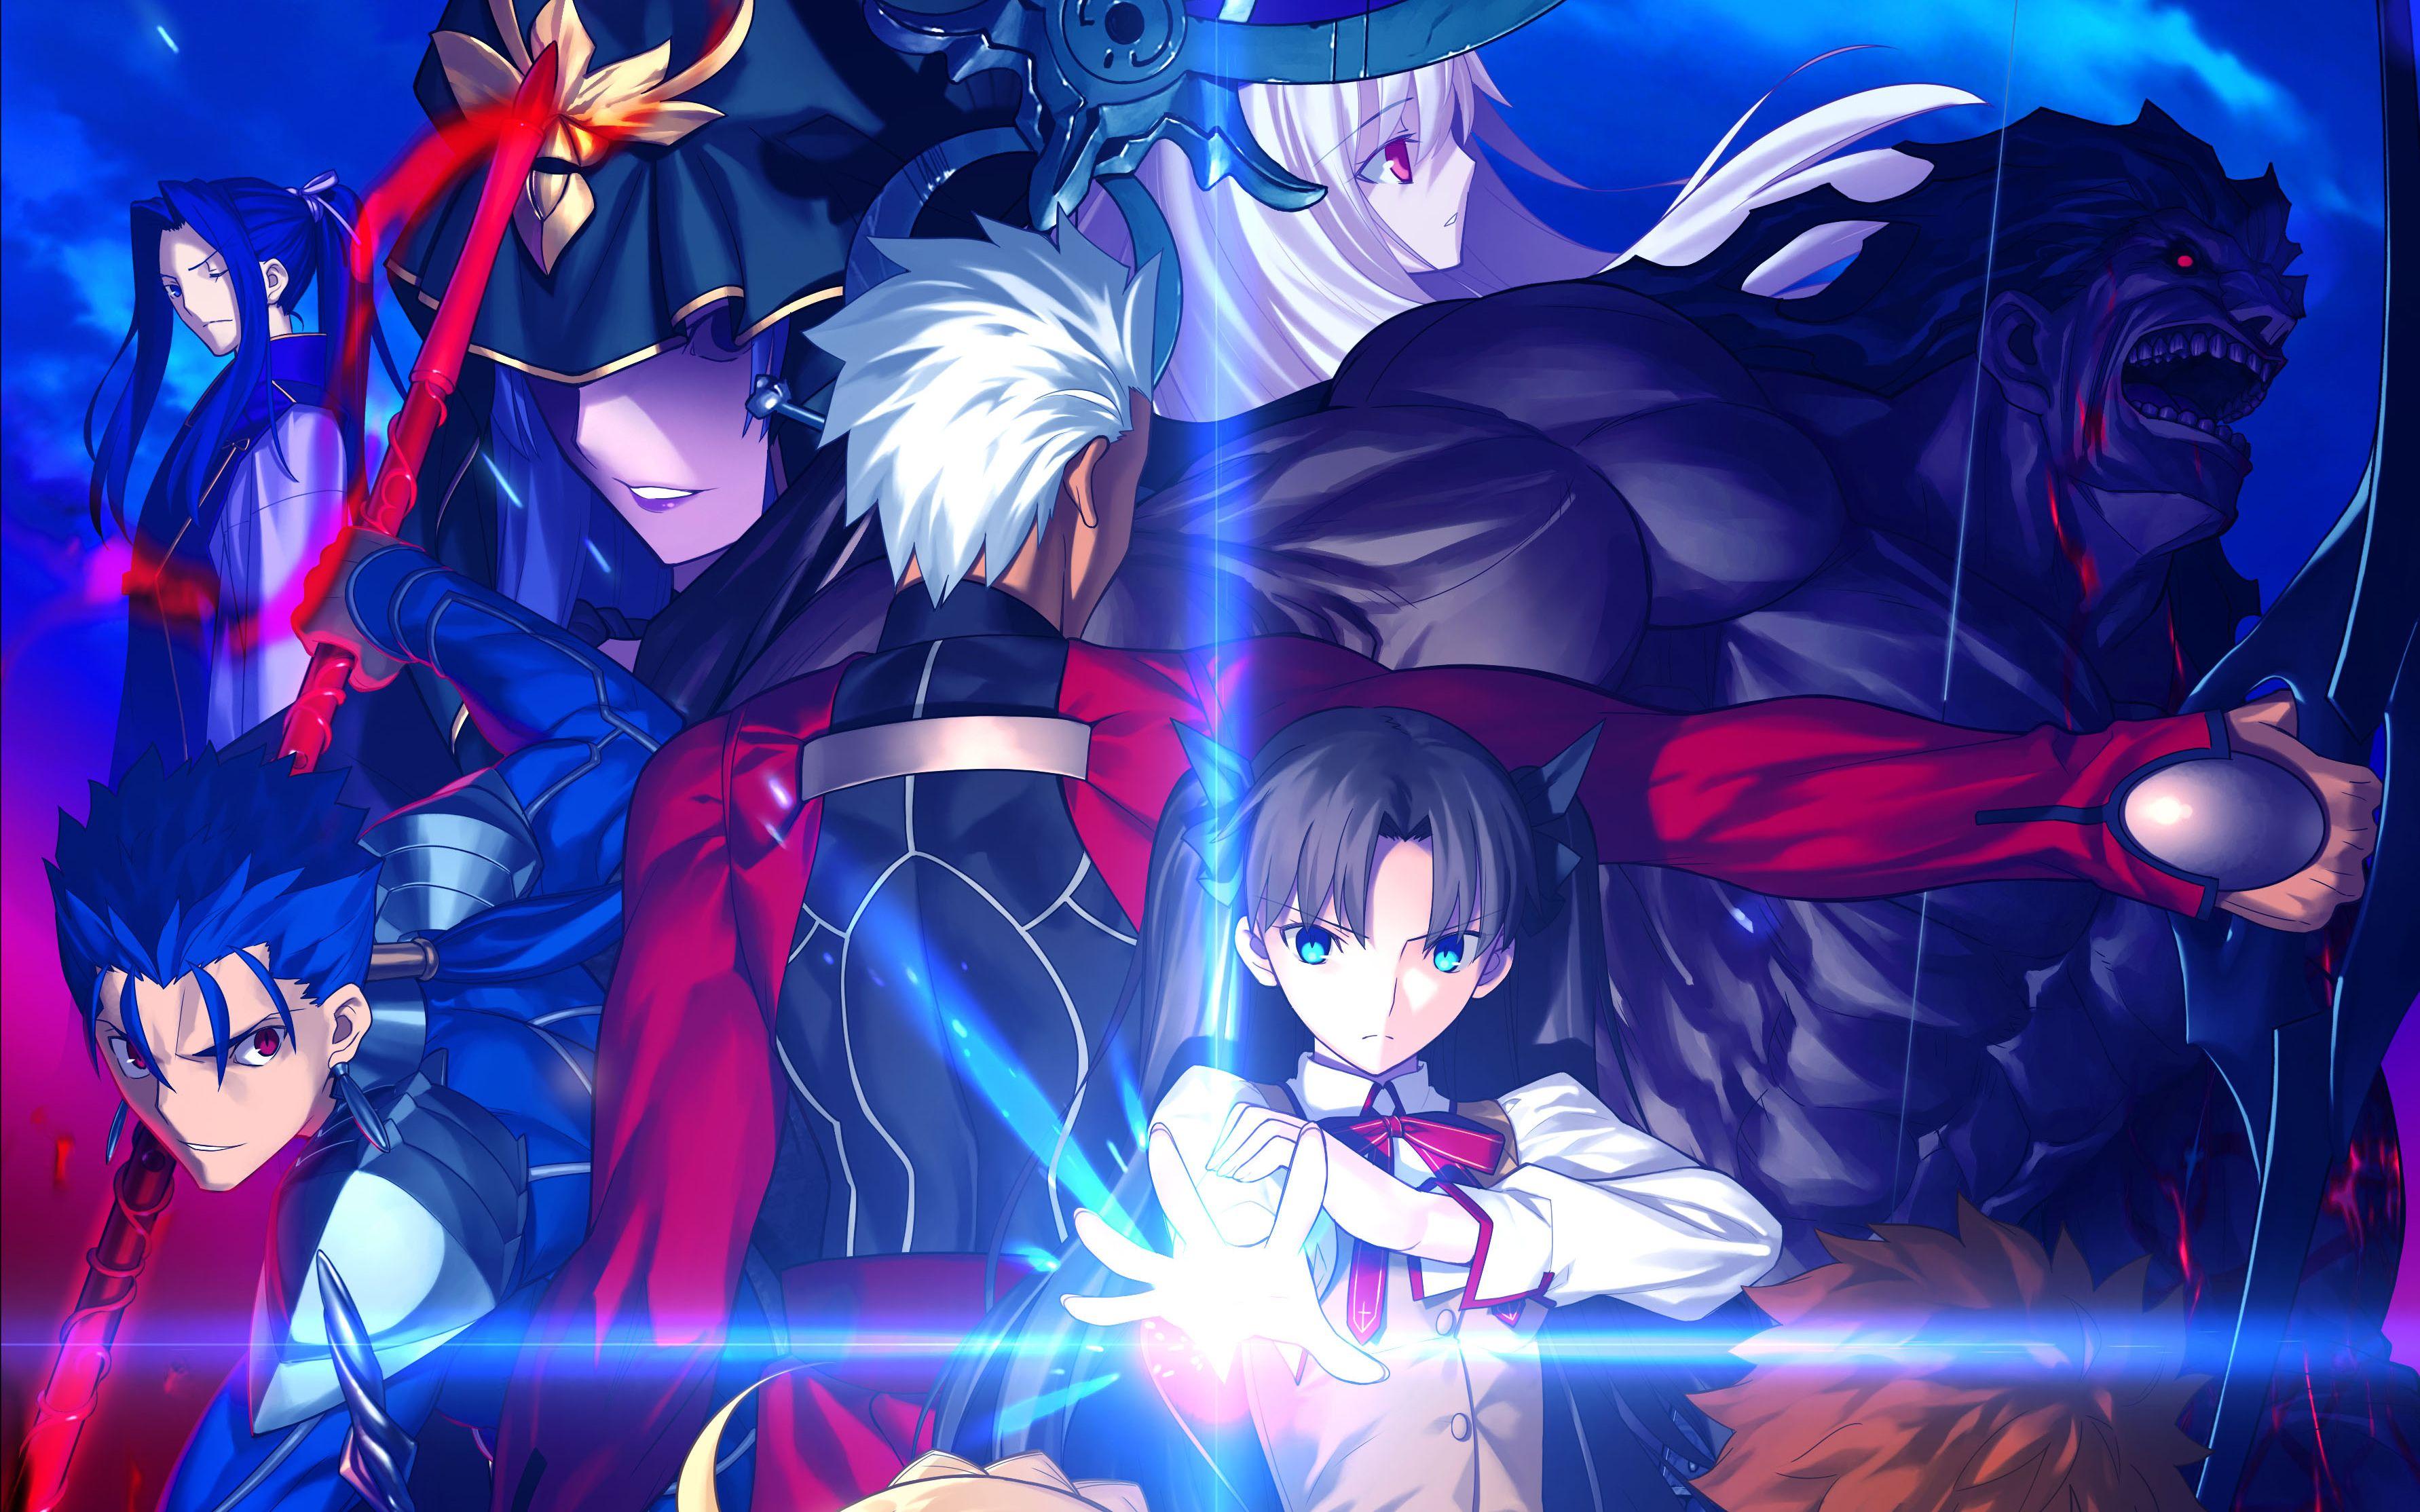 Fate/stay night: Unlimited Blade Works Wallpapers - Top Free Fate/stay